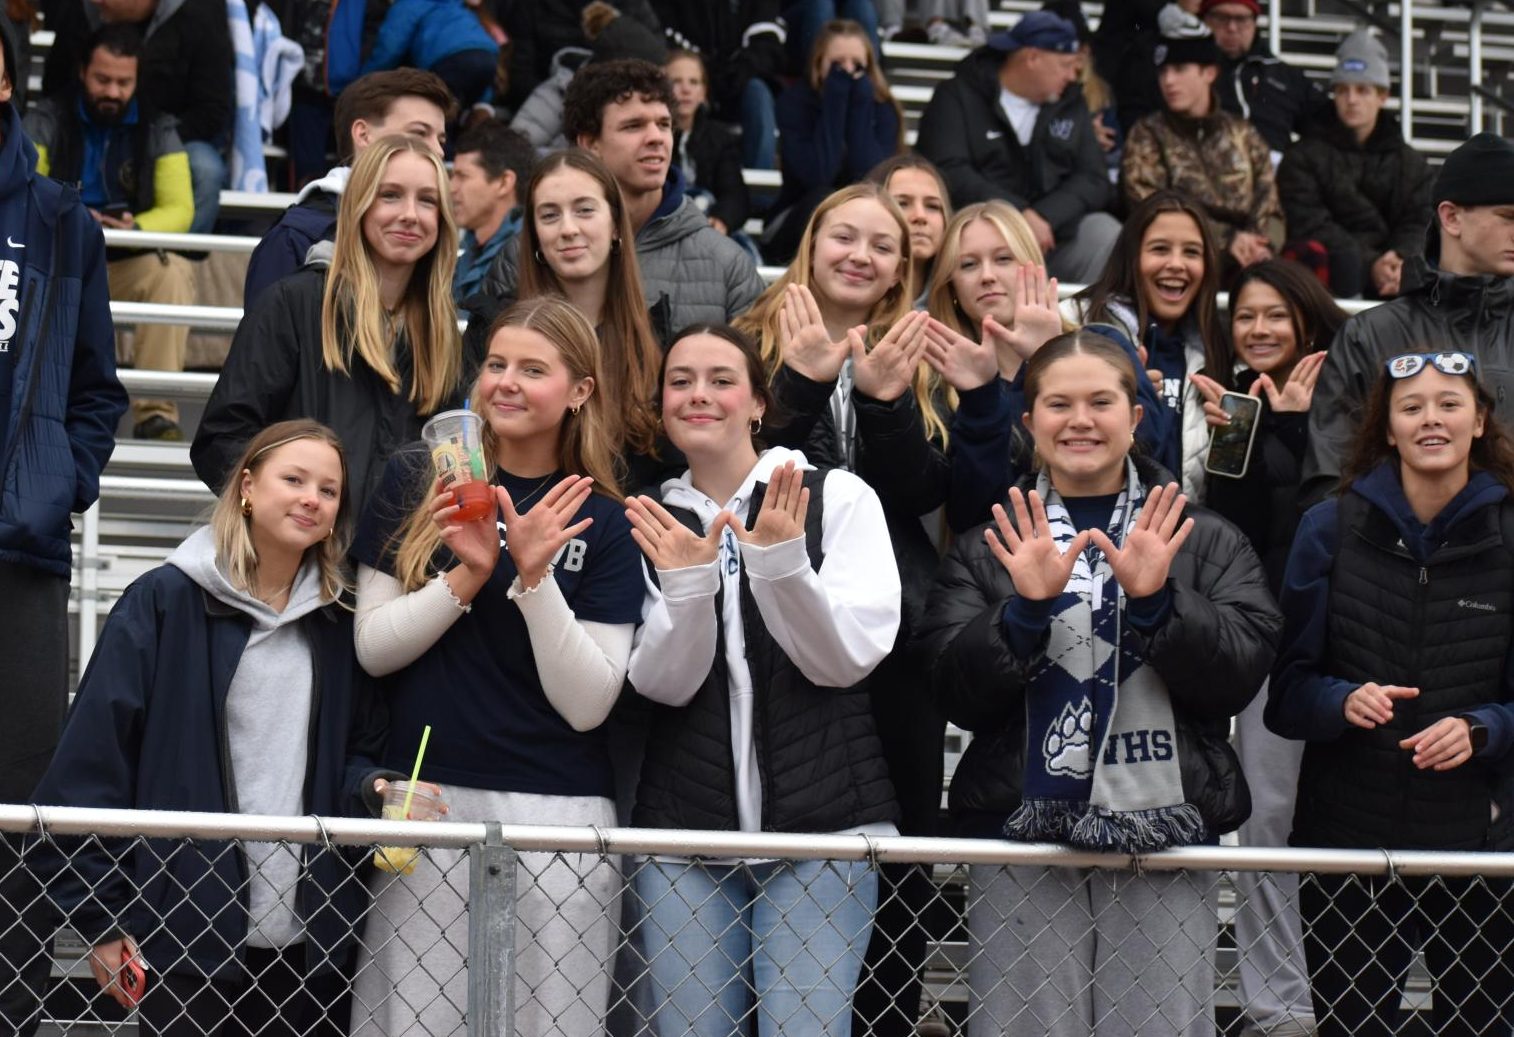 The Wilsonville Wildcats are known for their passionate and strong athletics fan base. Students and supporters showed up in droves to watch this final match. 